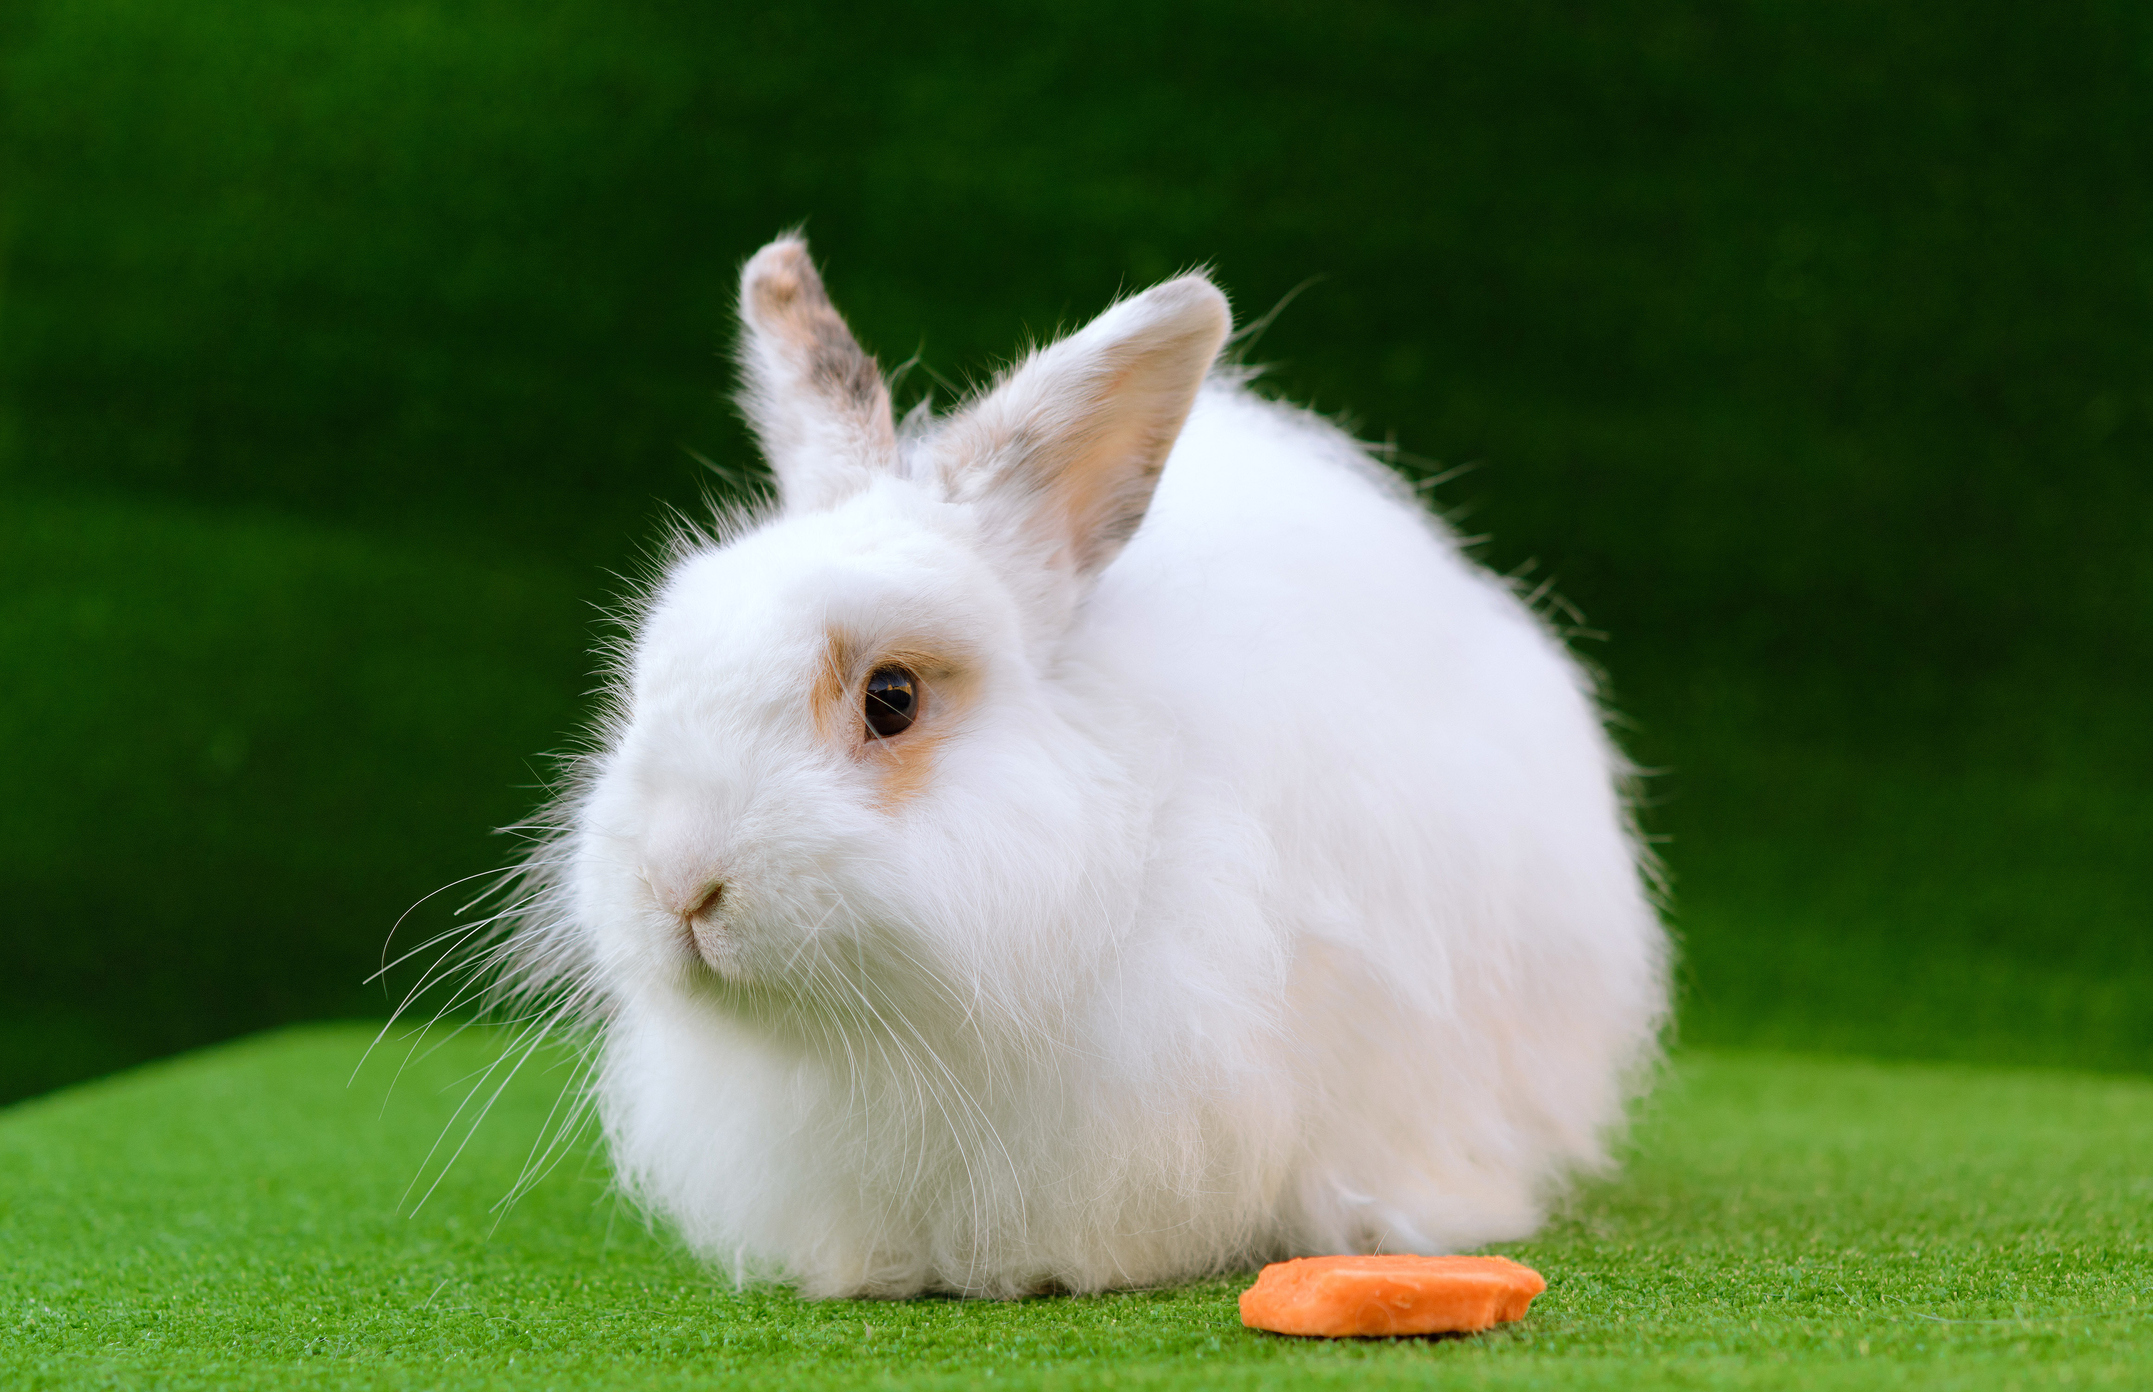 Woman Stunned By Bunny’s Impressive Trick in Adorable Clip: ‘Smart Boy!’